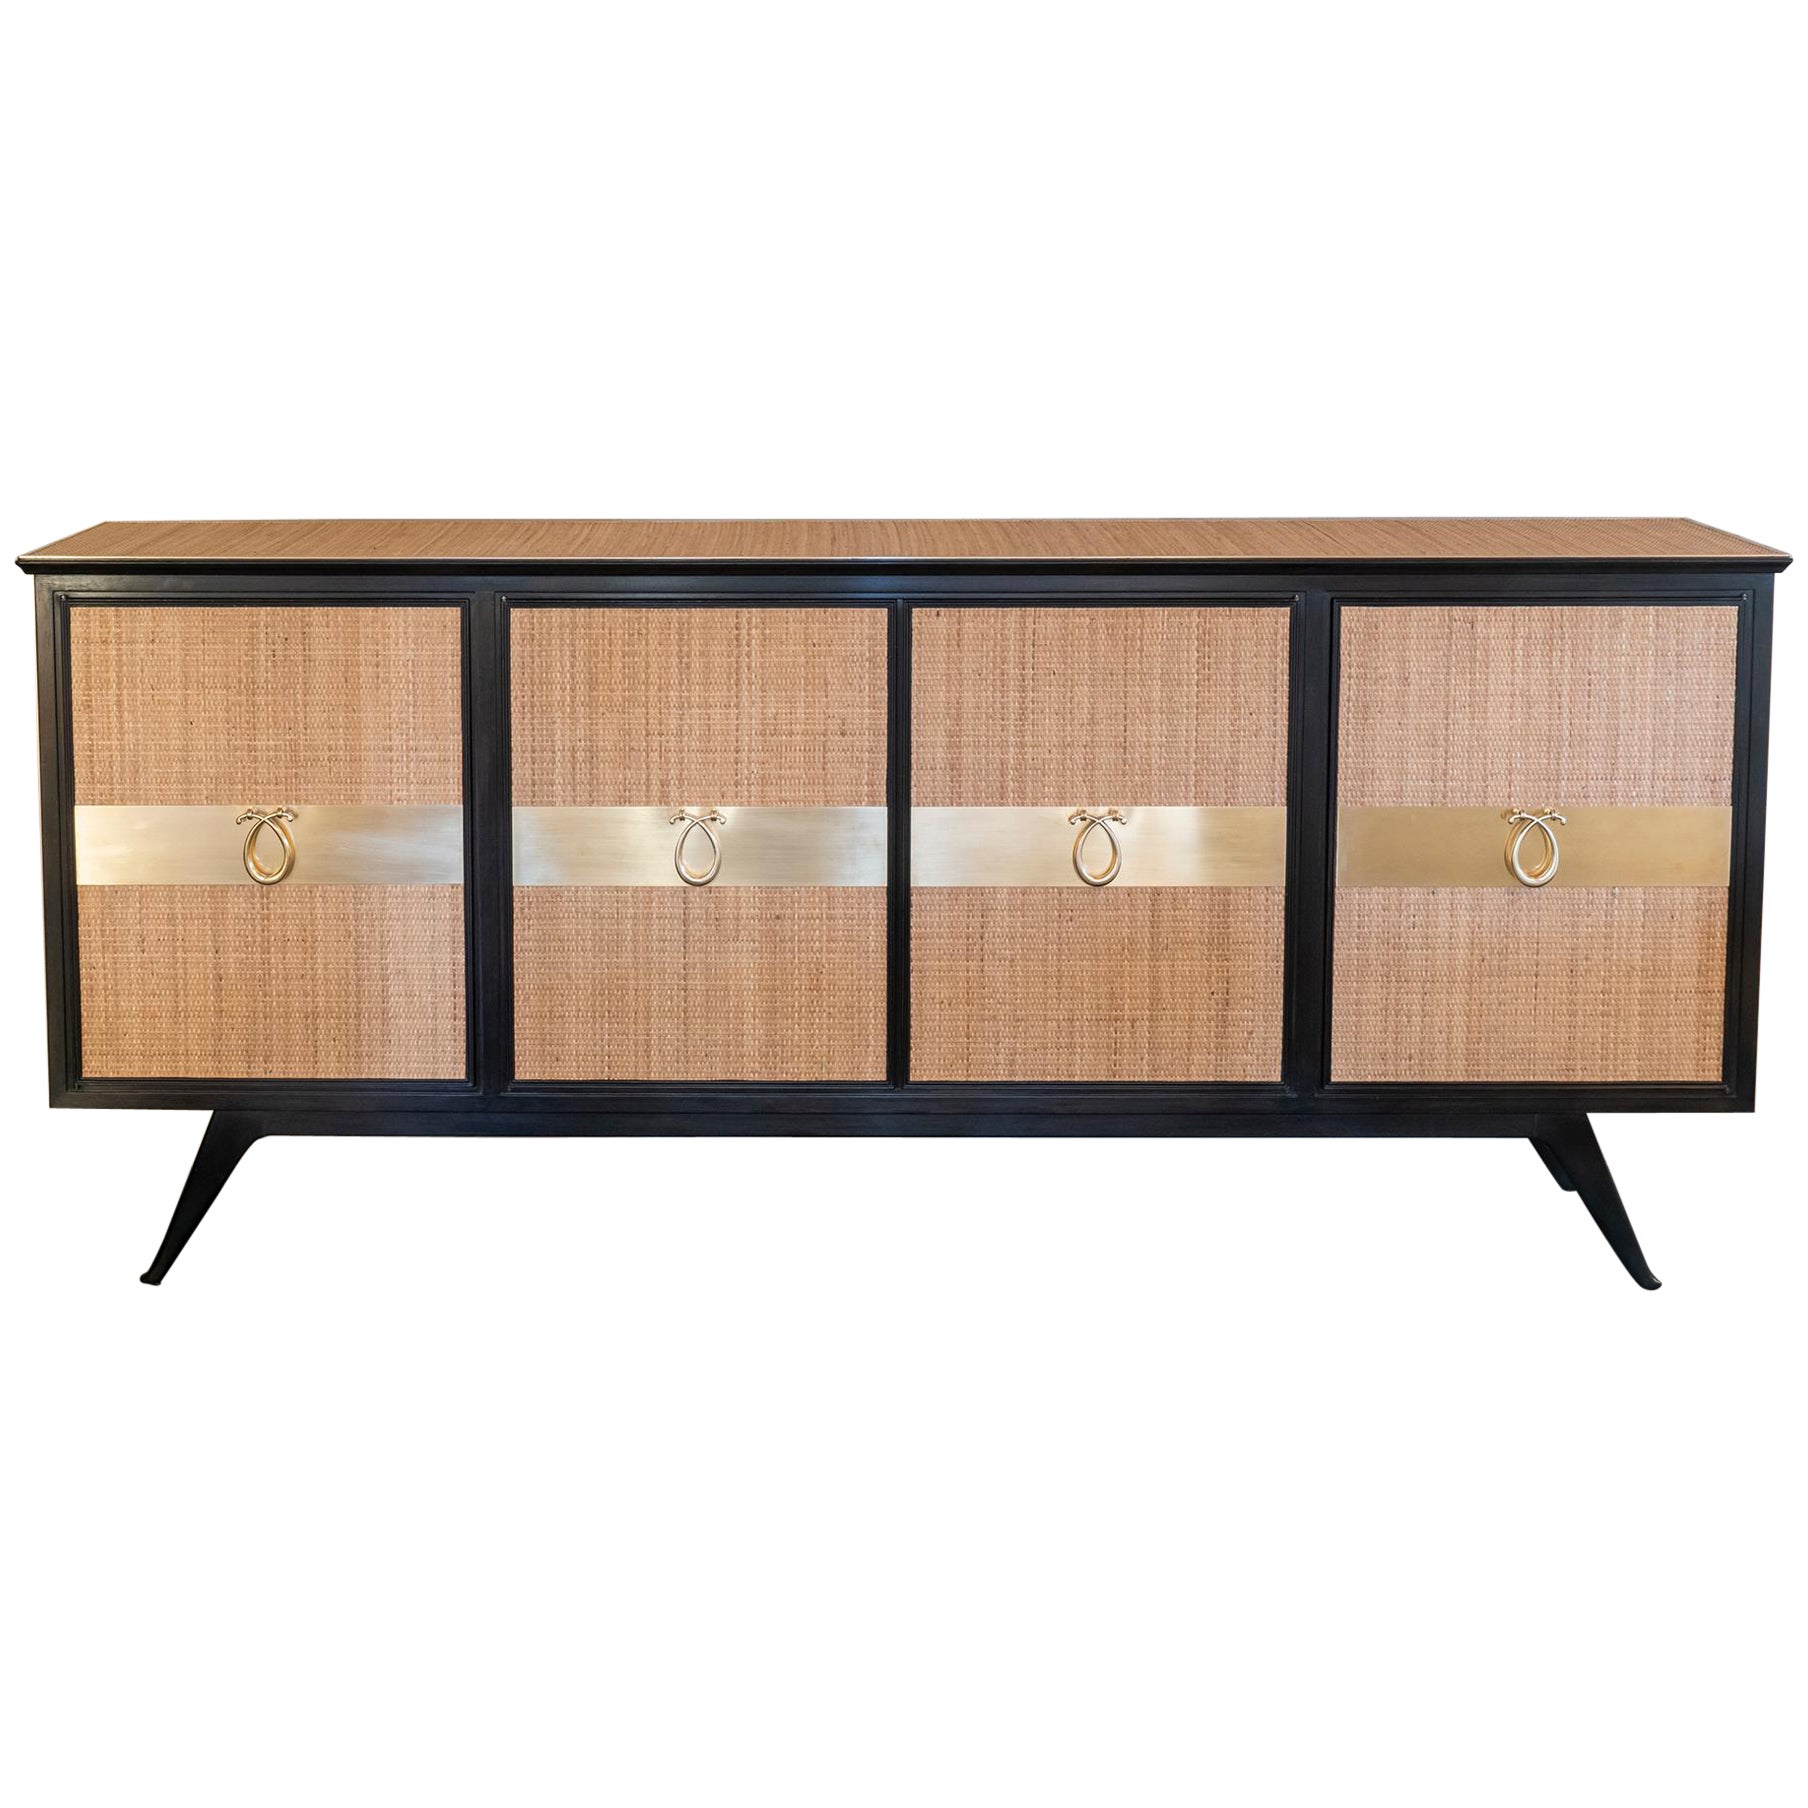 1950's Italian Sideboard Wood and Rattan with Brass Details For Sale